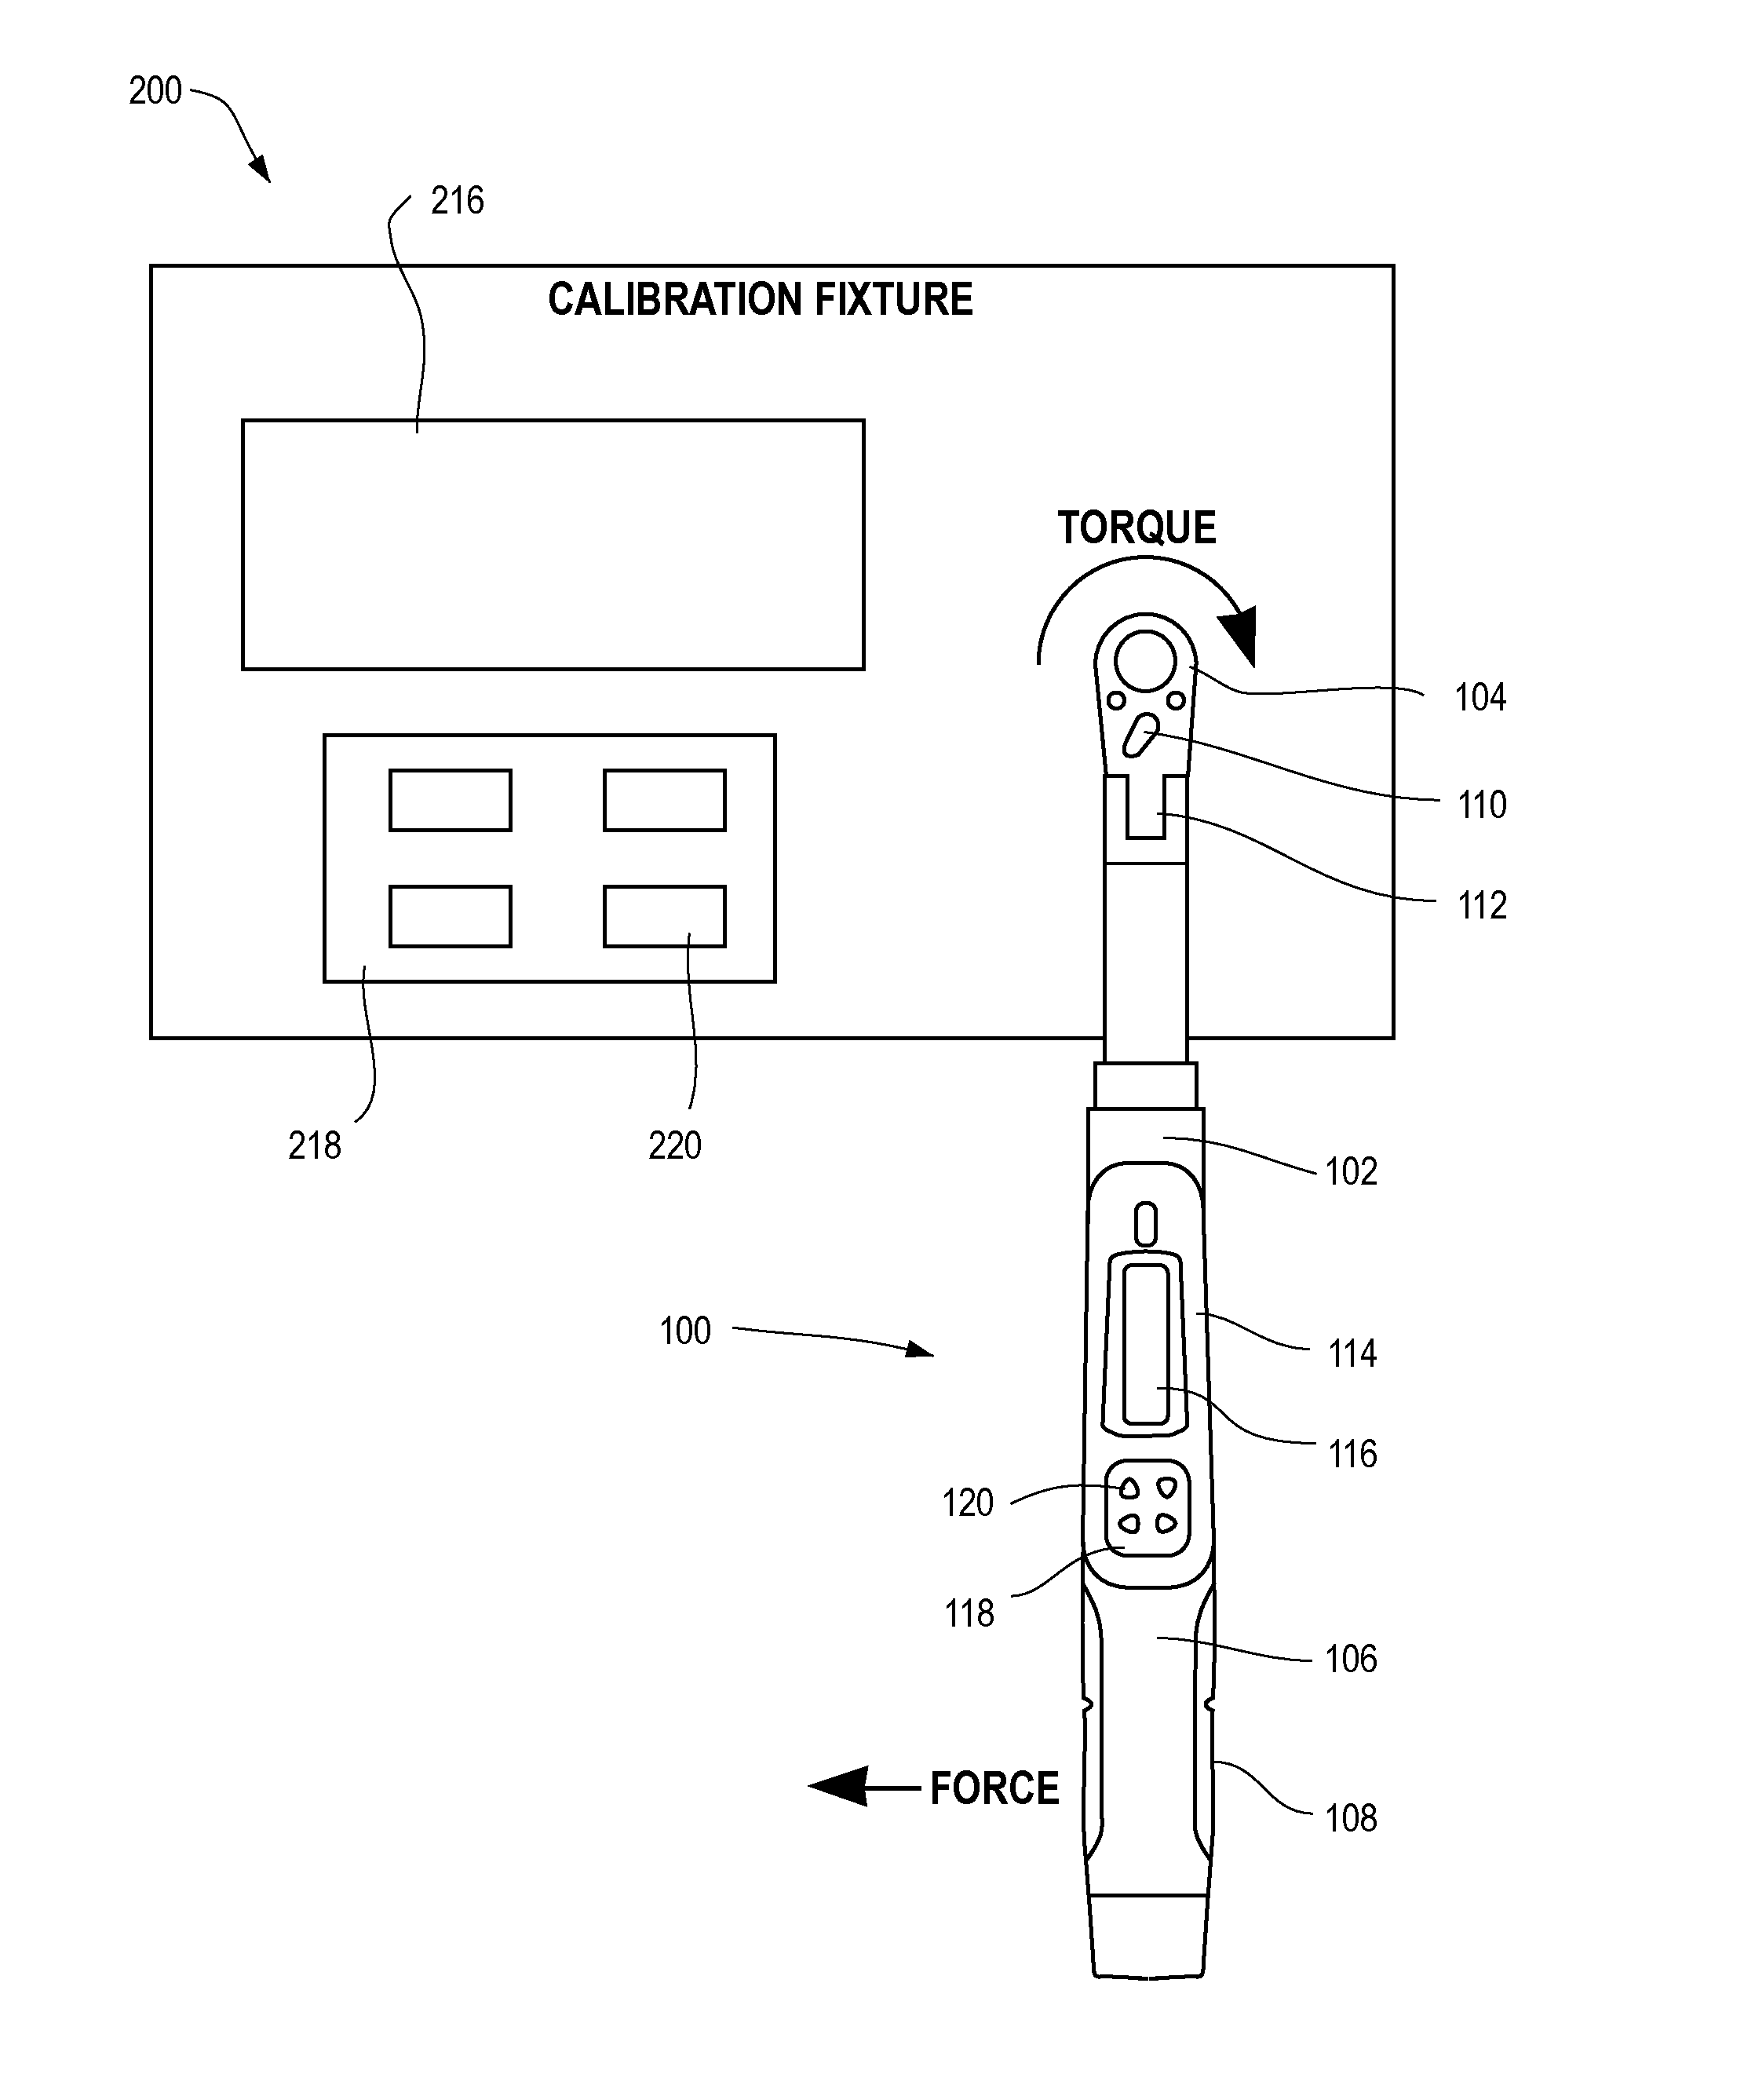 Method of Calibrating Torque Using Peak Hold Measurement on an Electronic Torque Wrench